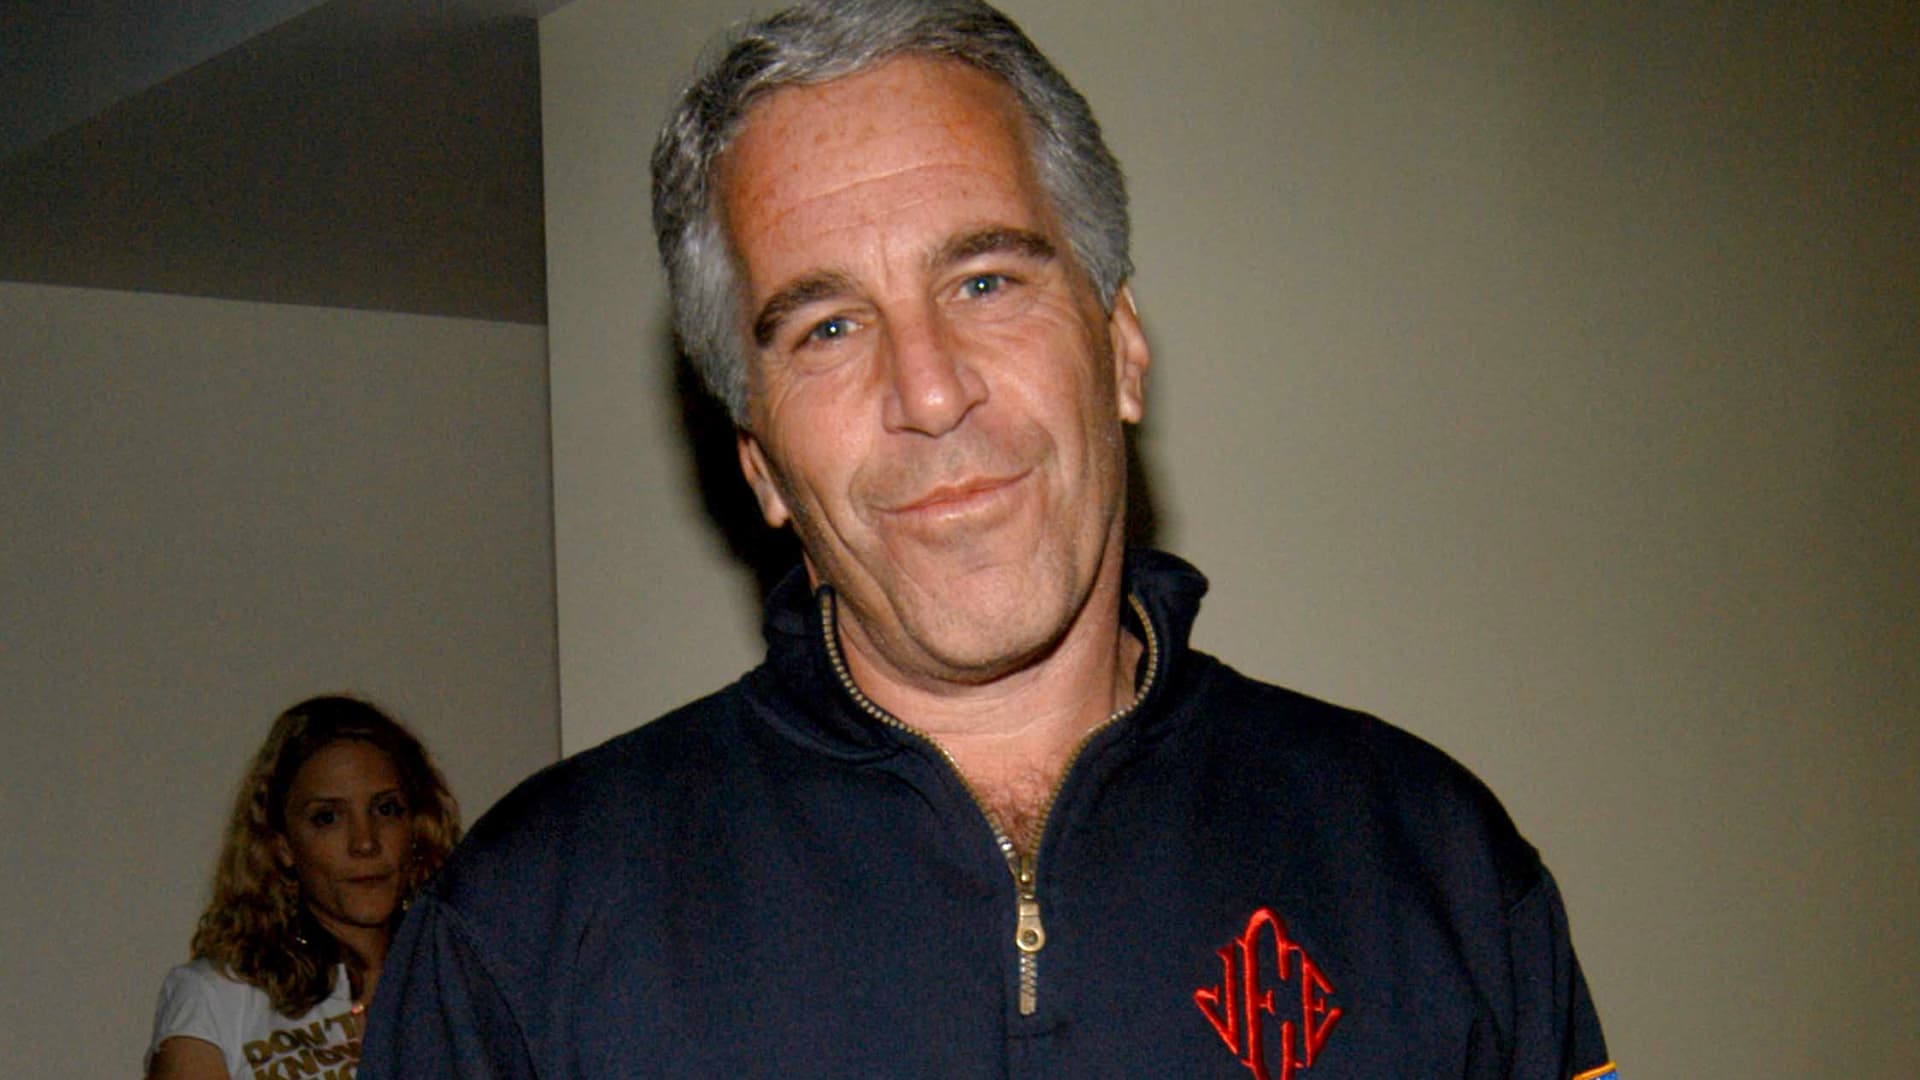 More Jeffrey Epstein court documents and names to be released